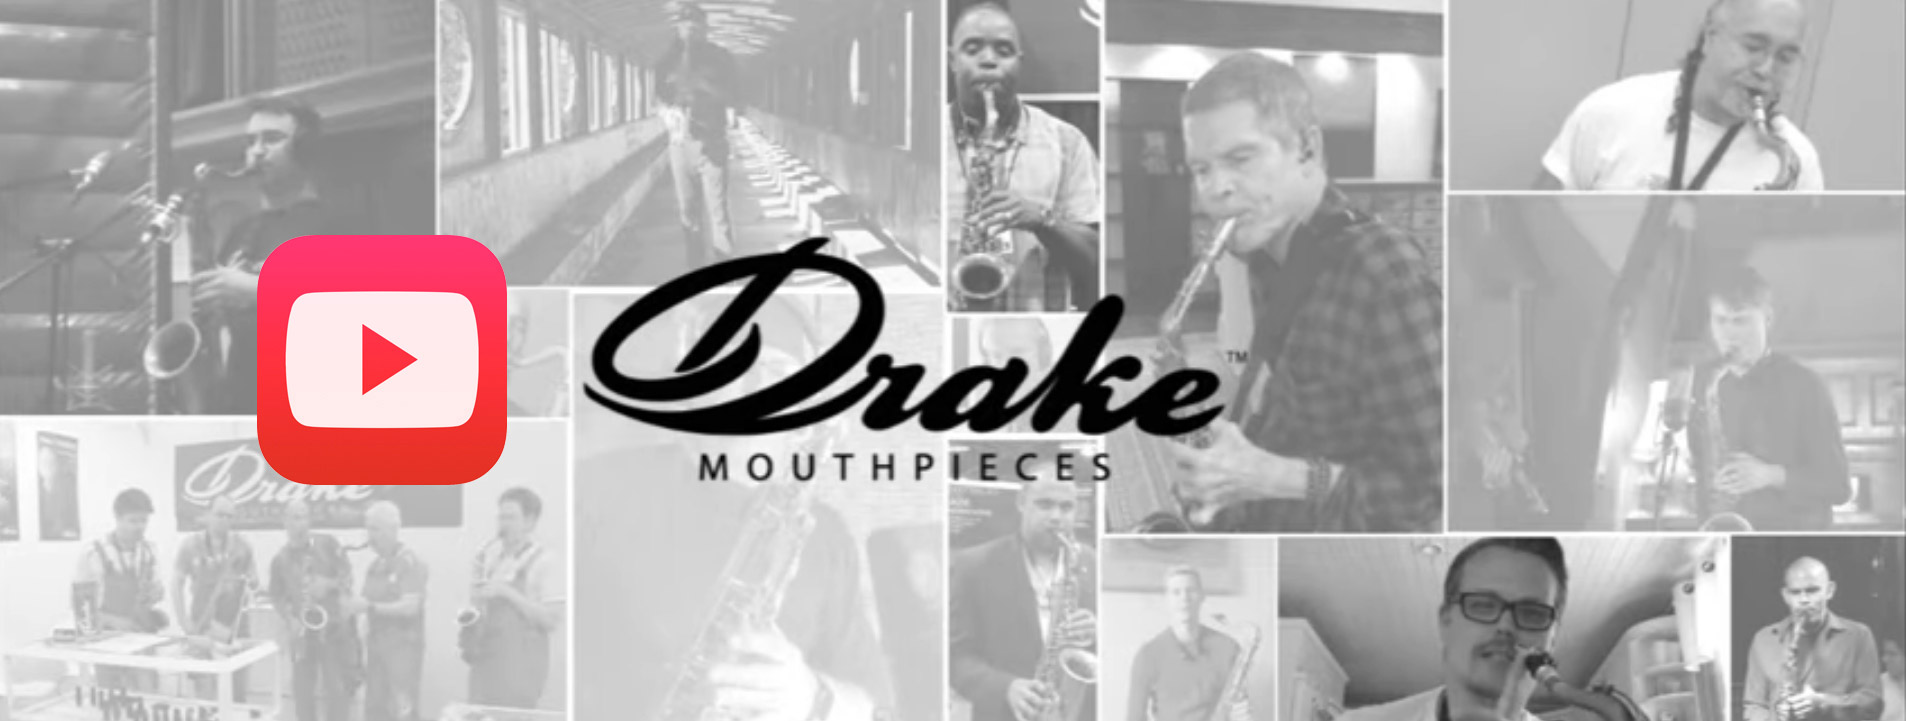 Drake Mouthpieces Banner for youtube